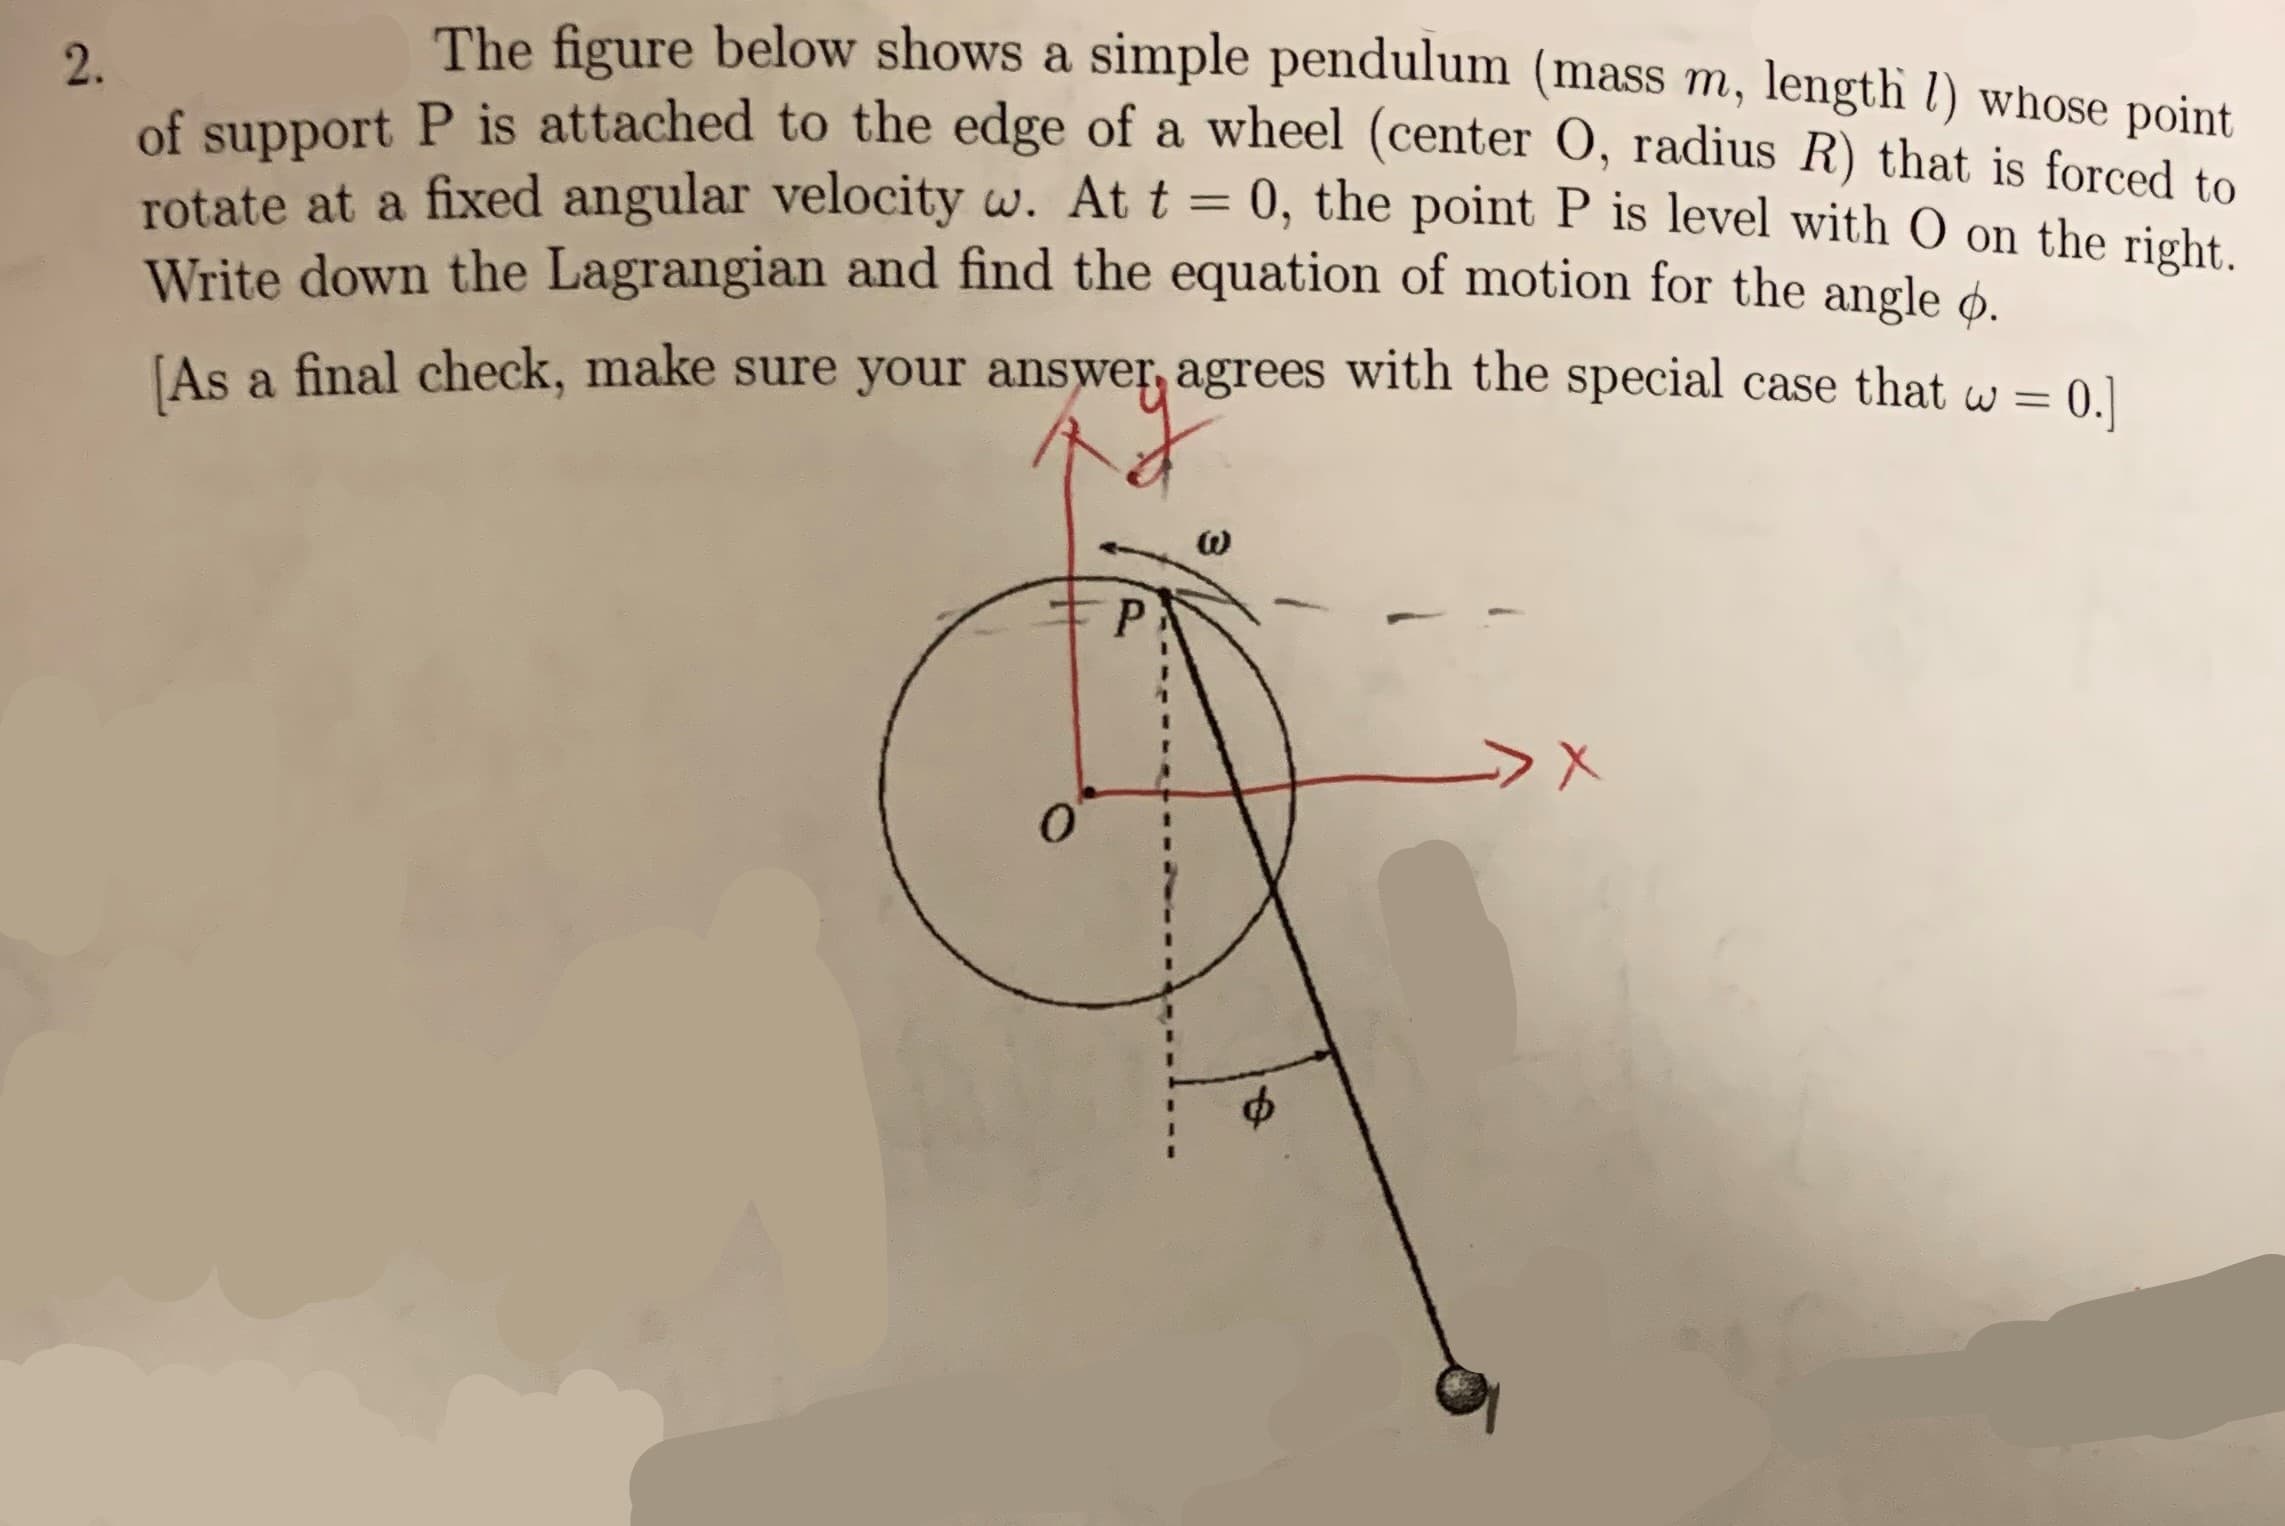 The figure below shows a simple pendulum (mass m, length l) whose point.
2.
of support P is attached to the edge of a wheel (center O, radius R) that is forced to
rotate at a fixed angular velocity w. At t = 0, the point P is level with O on the right.
Write down the Lagrangian and find the equation of motion for the angle
As a final check, make sure your answer, agrees with the special case that w = [
P
X
0
